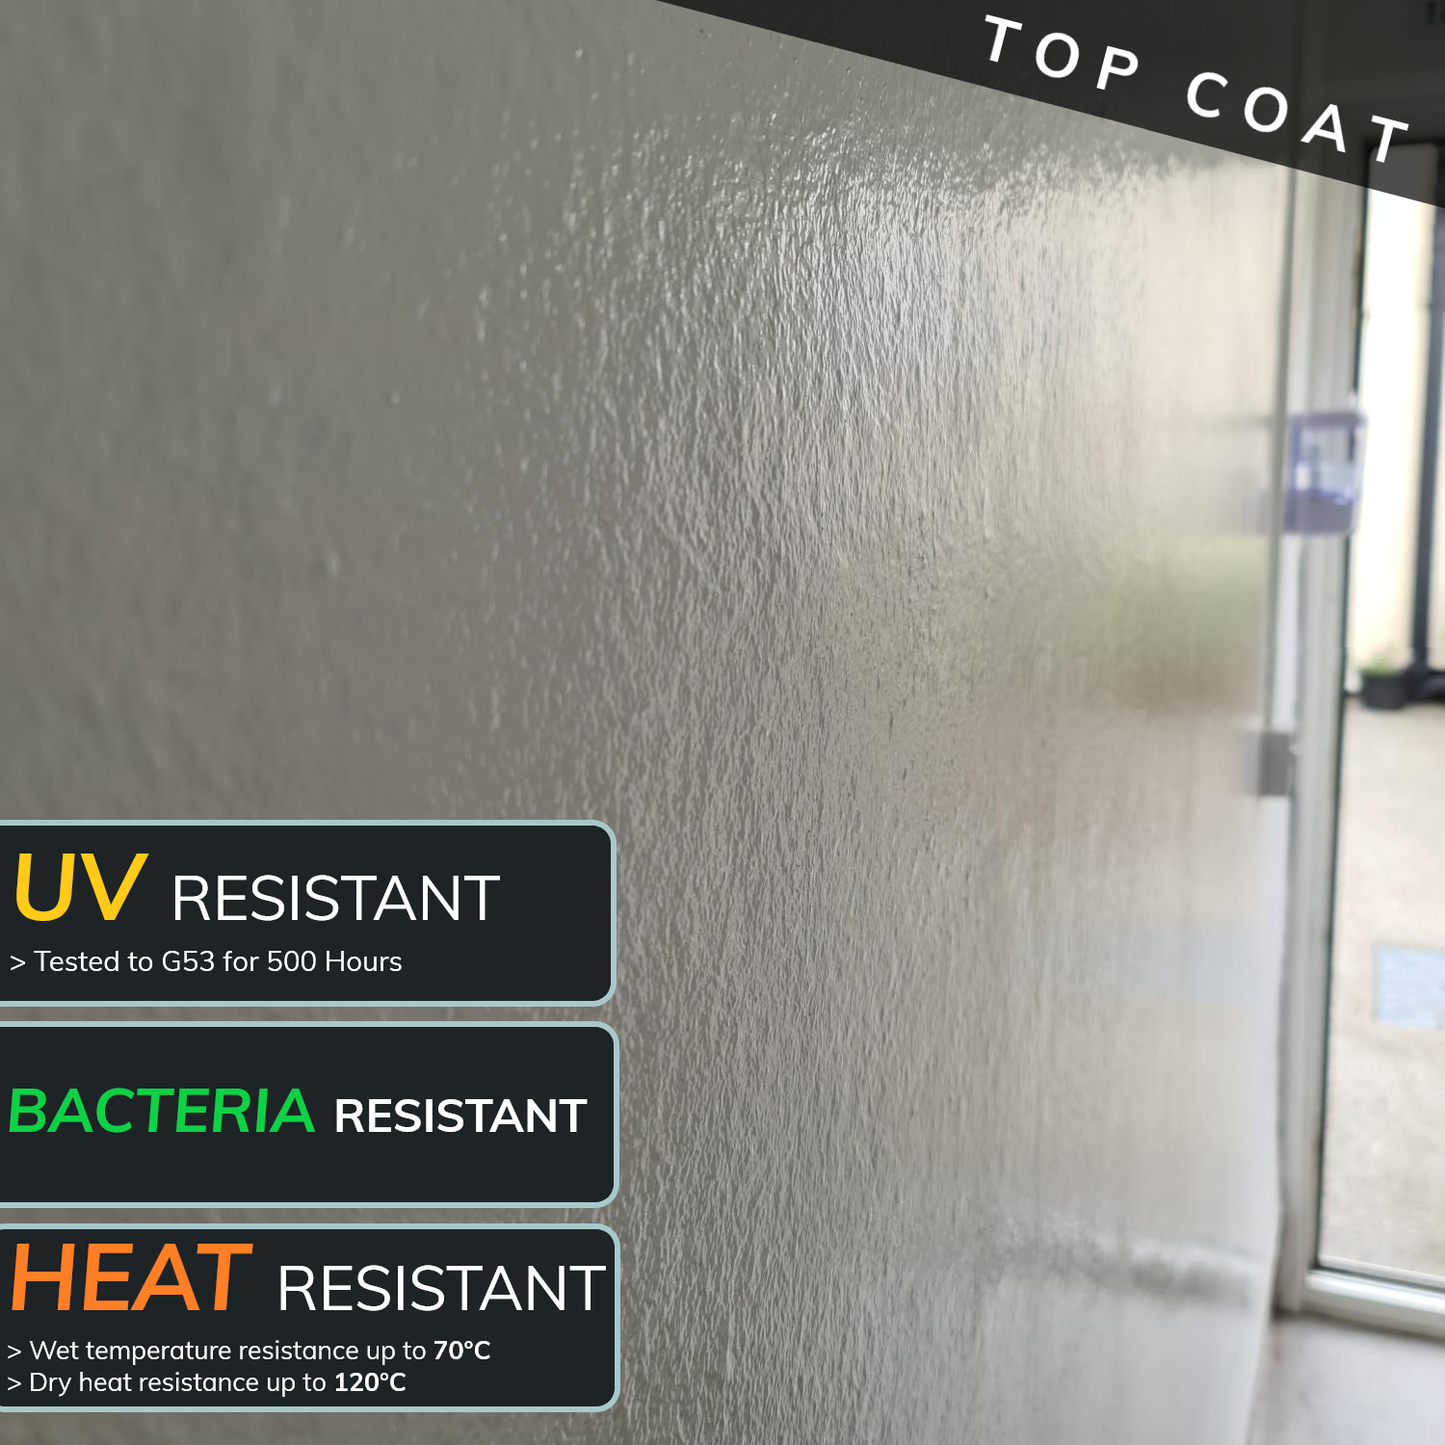 Wallcoat | High Performance UV Stable Water Based Epoxy Coating for Walls